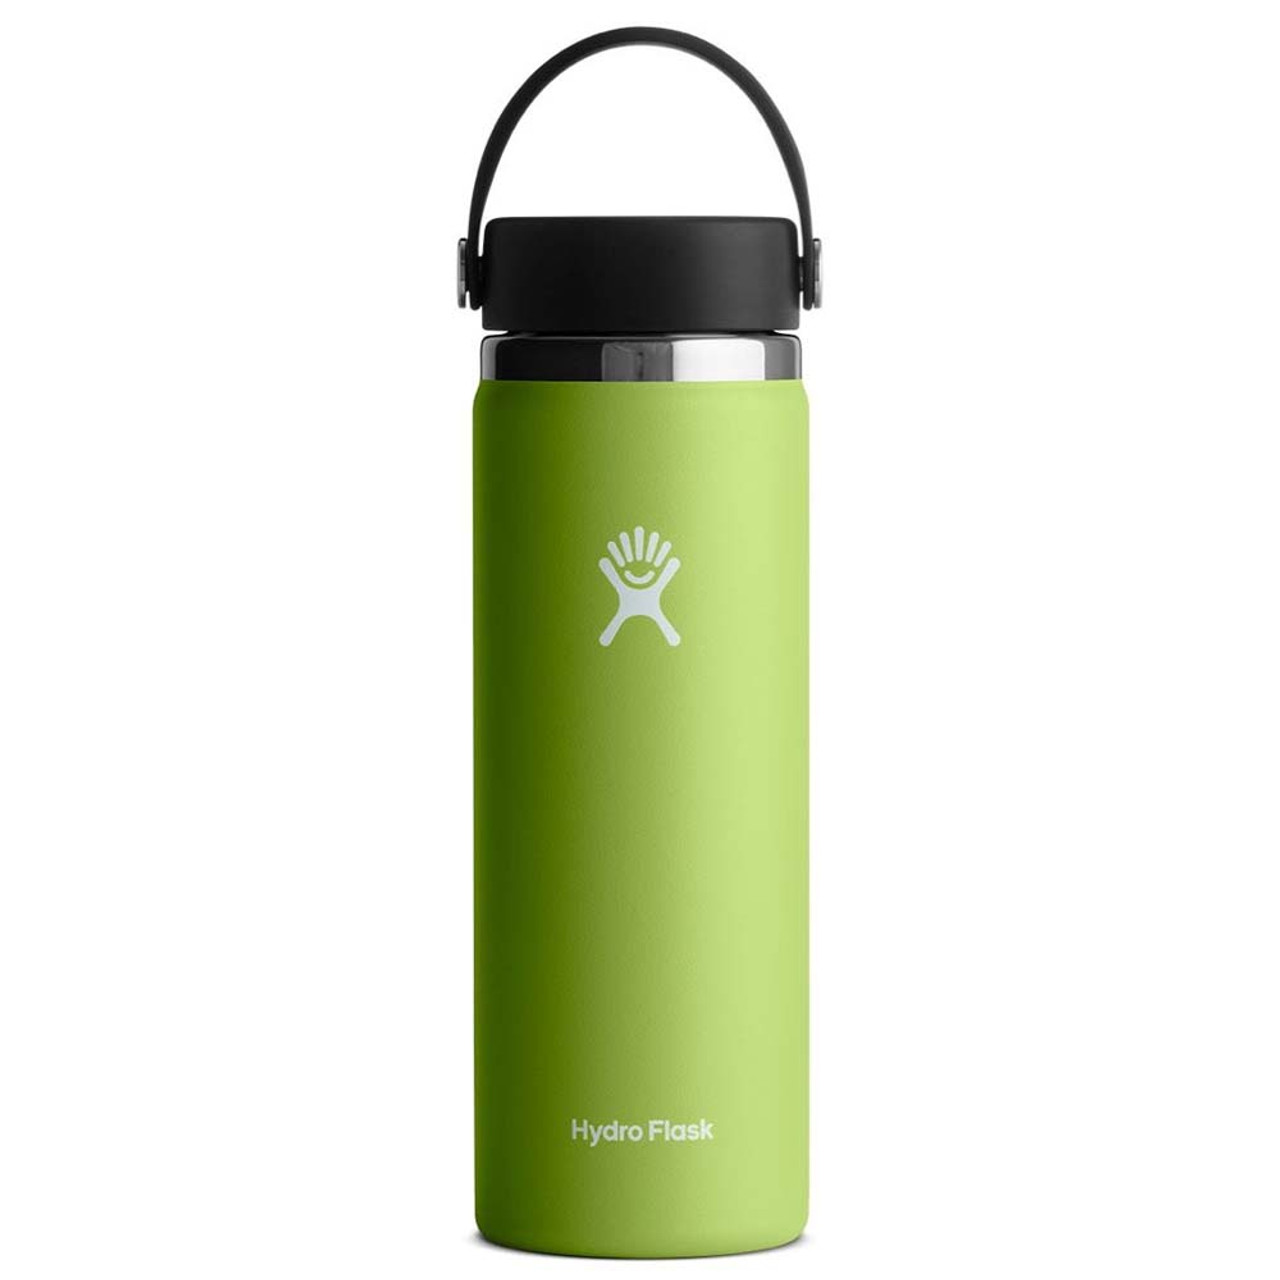 https://cdn11.bigcommerce.com/s-zut1msomd6/images/stencil/1280x1280/products/13762/213565/hydroflask-W20BTS-20-oz-wide-mouth-bottle-seagrass-green-main__55547.1652199824.jpg?c=1